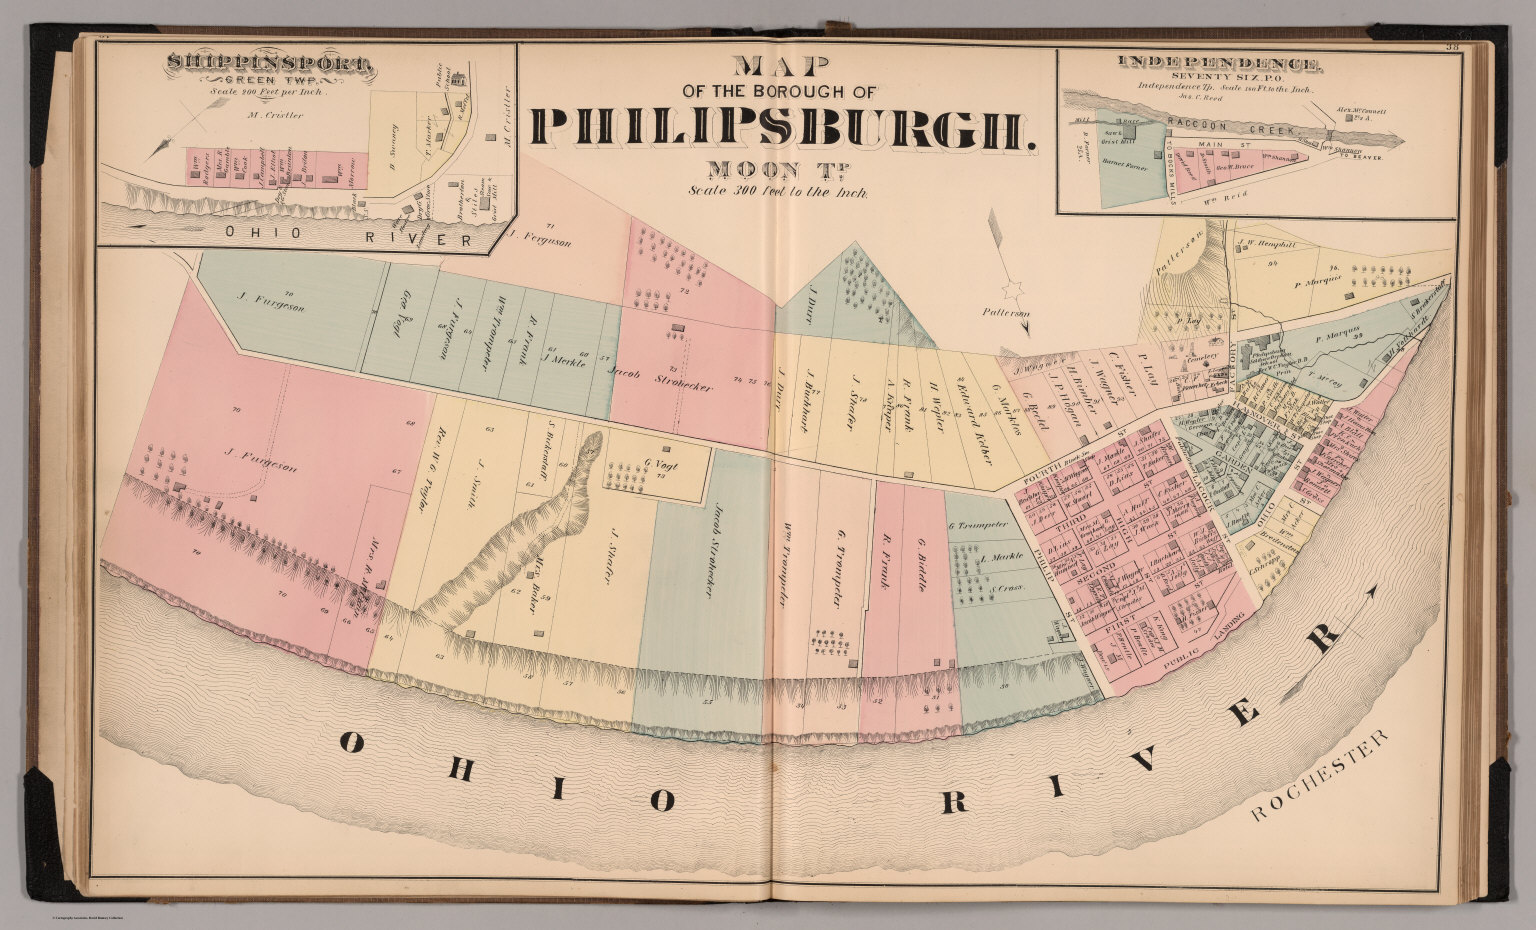 Map Of The Borough Of Philipsburg Moon Tp David Rumsey Historical Map Collection 7341